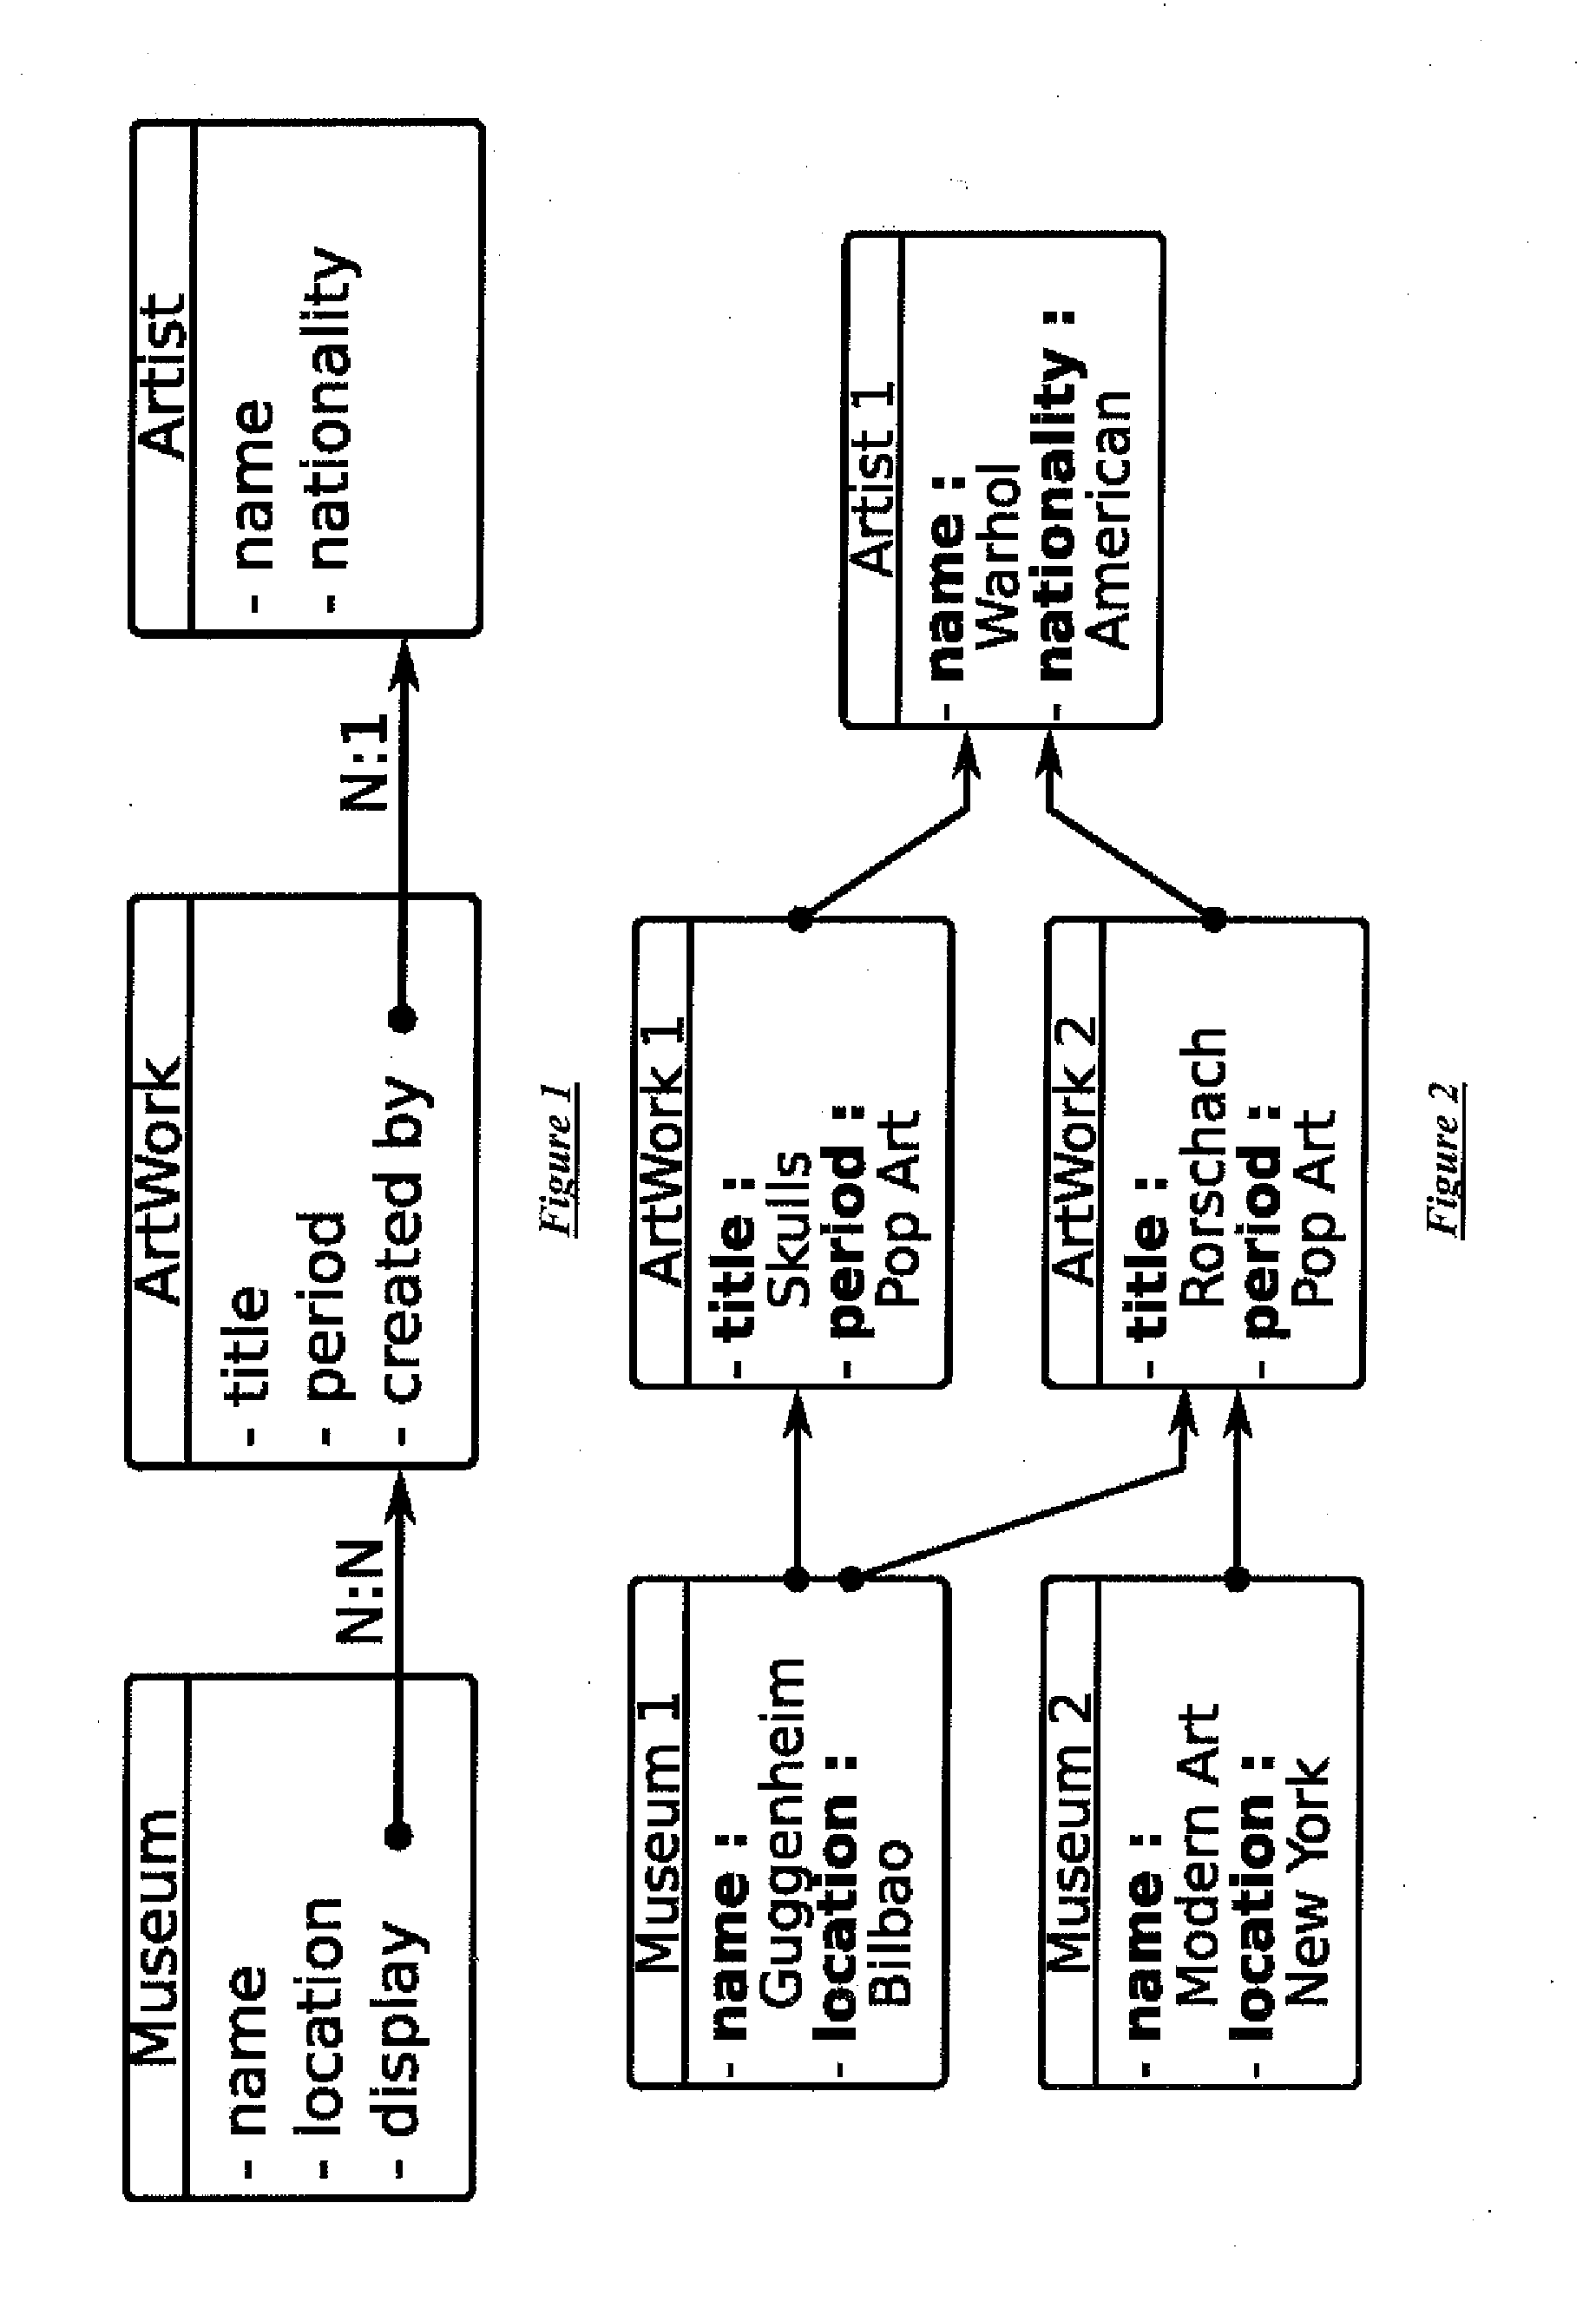 Method and system for navigating complex data sets